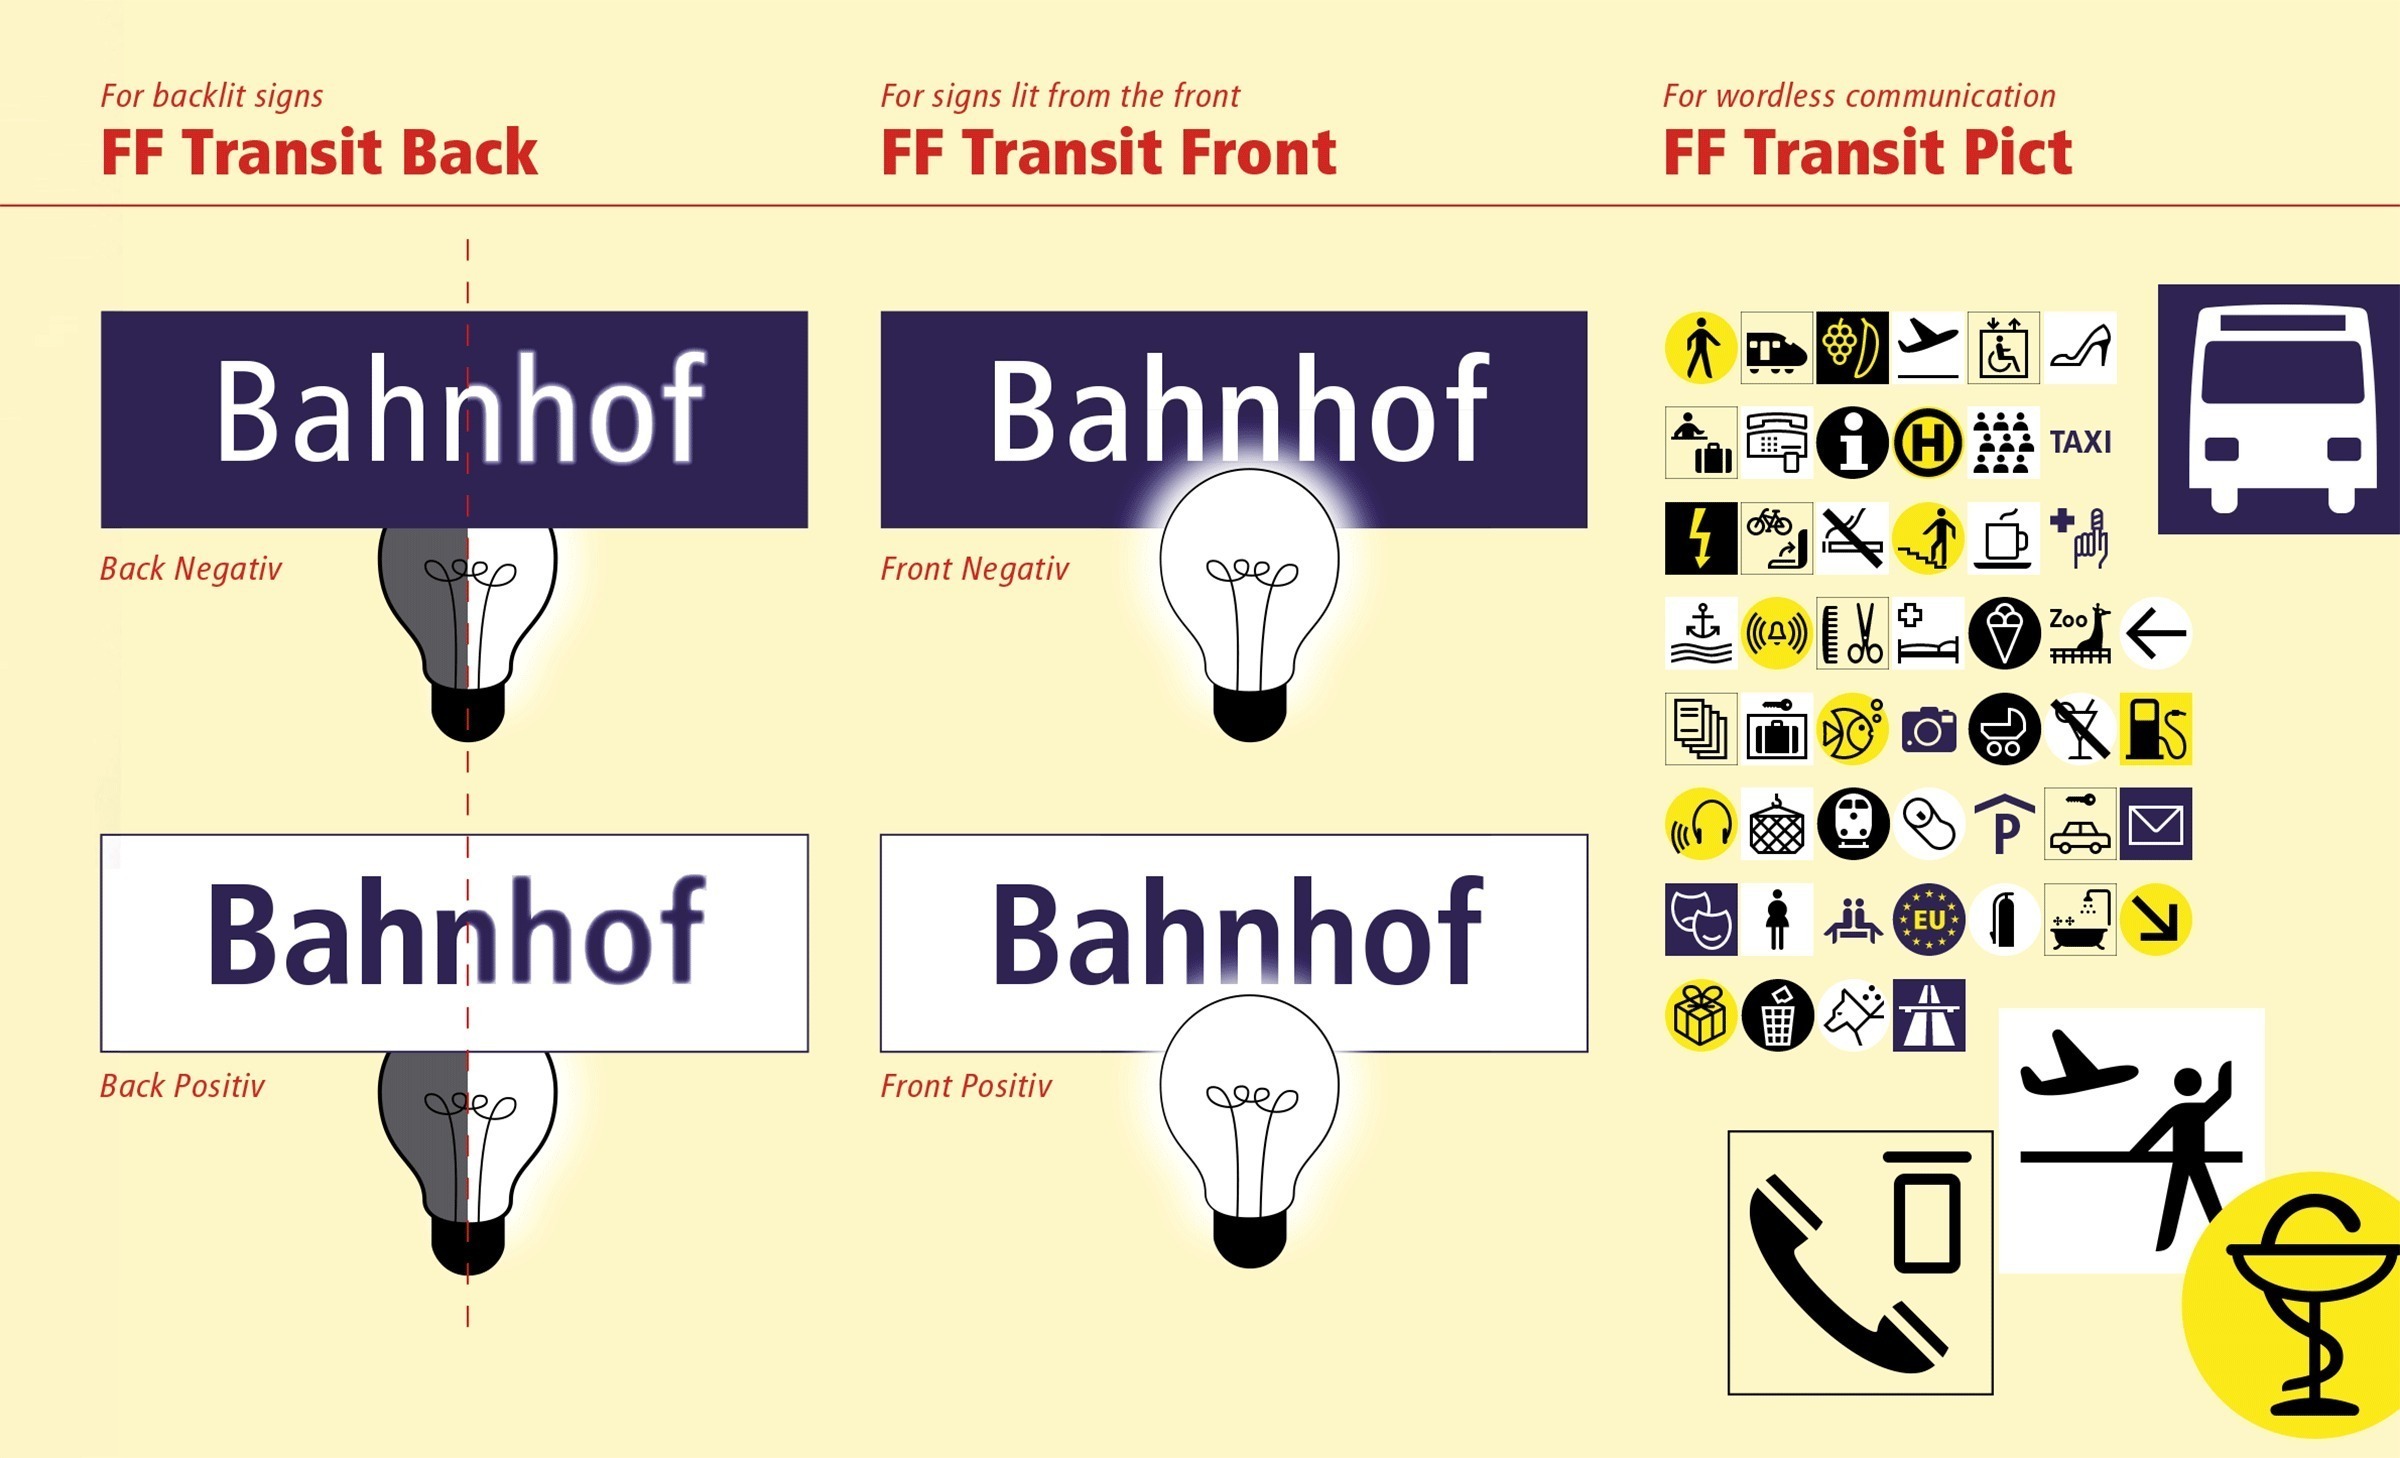 As part of MetaDesign’s design of a new orientation system for the Berlin Transport Authorities (BVG) Erik Spiekermann and Lucas de Grot developed a signage-improved version of Frutiger that goes by the name FF Transit, taking front- and back-lit situations into account.